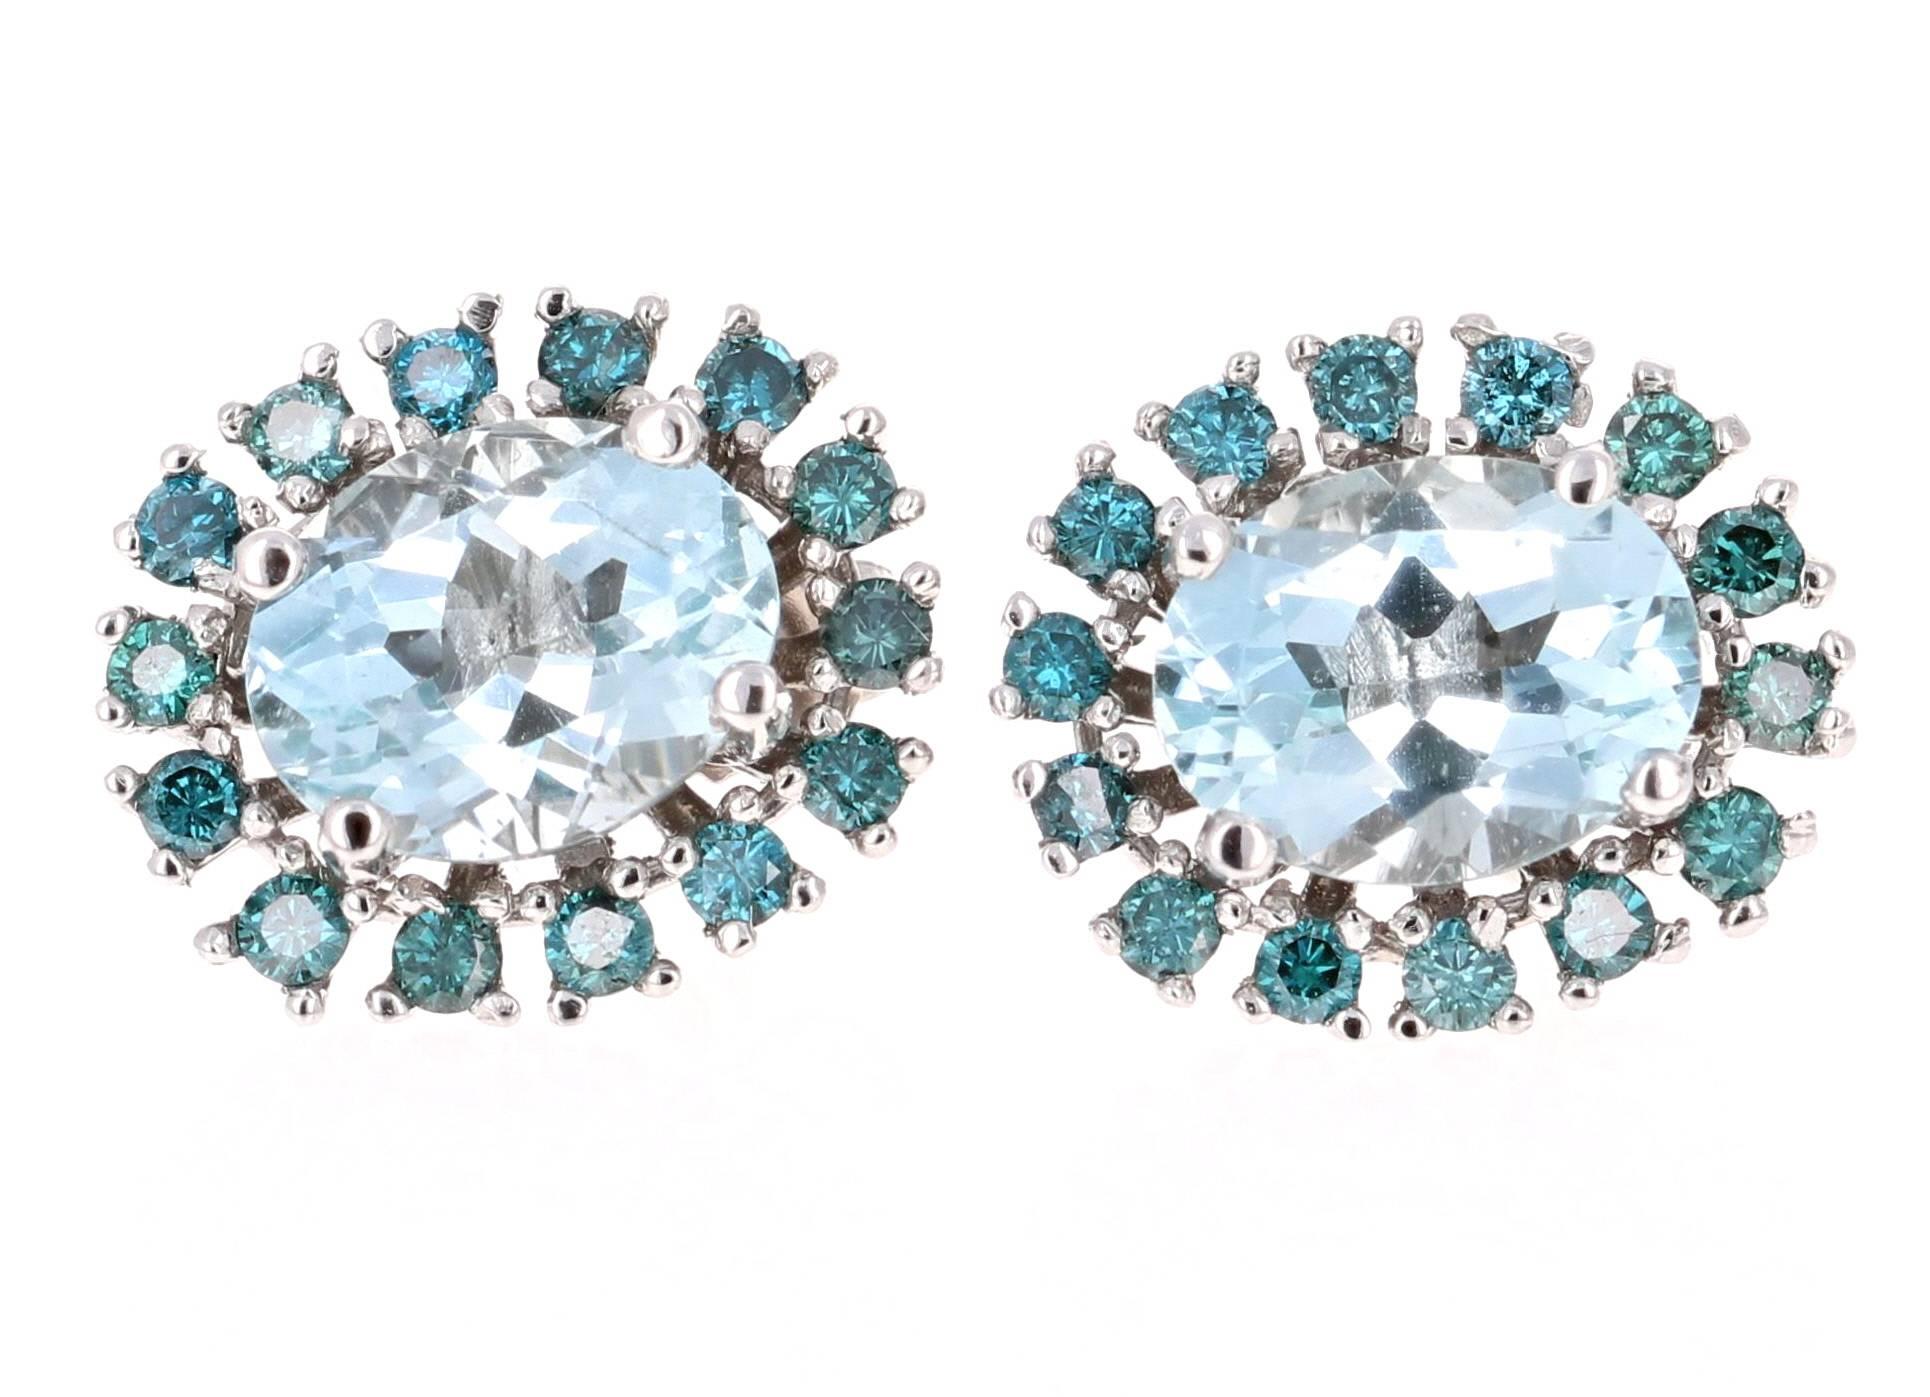 Super cute and unique Earrings made with pretty hues of Blue gemstones and diamonds.   
4.19 Carat Aquamarine and Blue Diamond White Gold Earring Studs!

There are 2 Oval Cut Aquamarines in the Earrings that weigh 3.46 Carats and they are surrounded